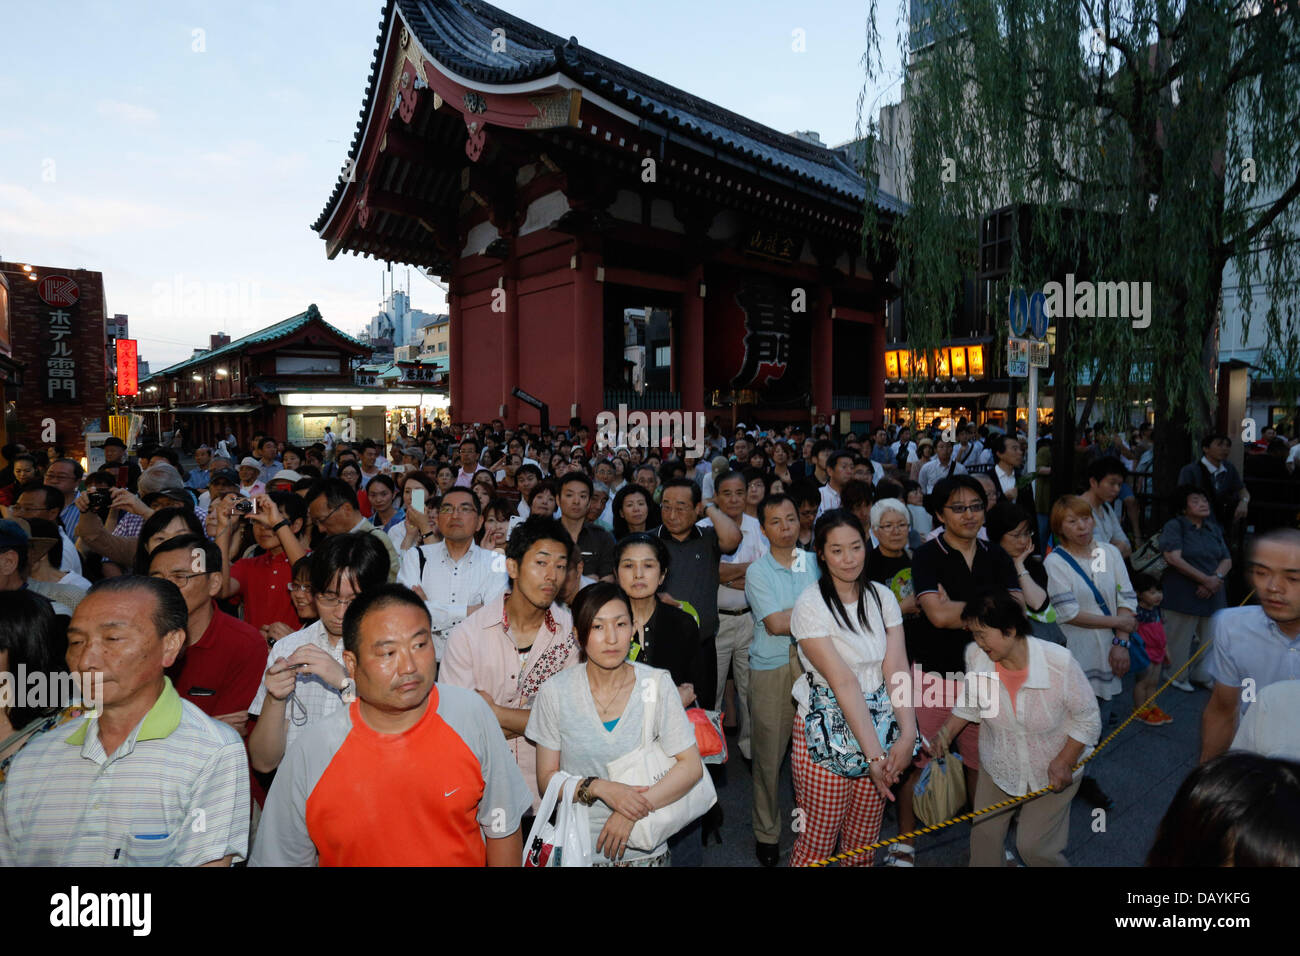 Tokyo, Japan. 20th July, 2013. A throng of voters, tourists and passersby stops and listen to Shinzo Abe, Japan's Prime Minister and president of the ruling Liberal Democratic Party, on his final stumping tour at Tokyo's Asakusa district on Saturday, July 20, 2013, as he wraps up official campaigning for Sunday's upper house election. The ruling coalition led by Abe's LDP is likely to win a comfortable majority that will give him a total control of both chambers of Japan's parliament. Credit:  Aflo Co. Ltd./Alamy Live News Stock Photo